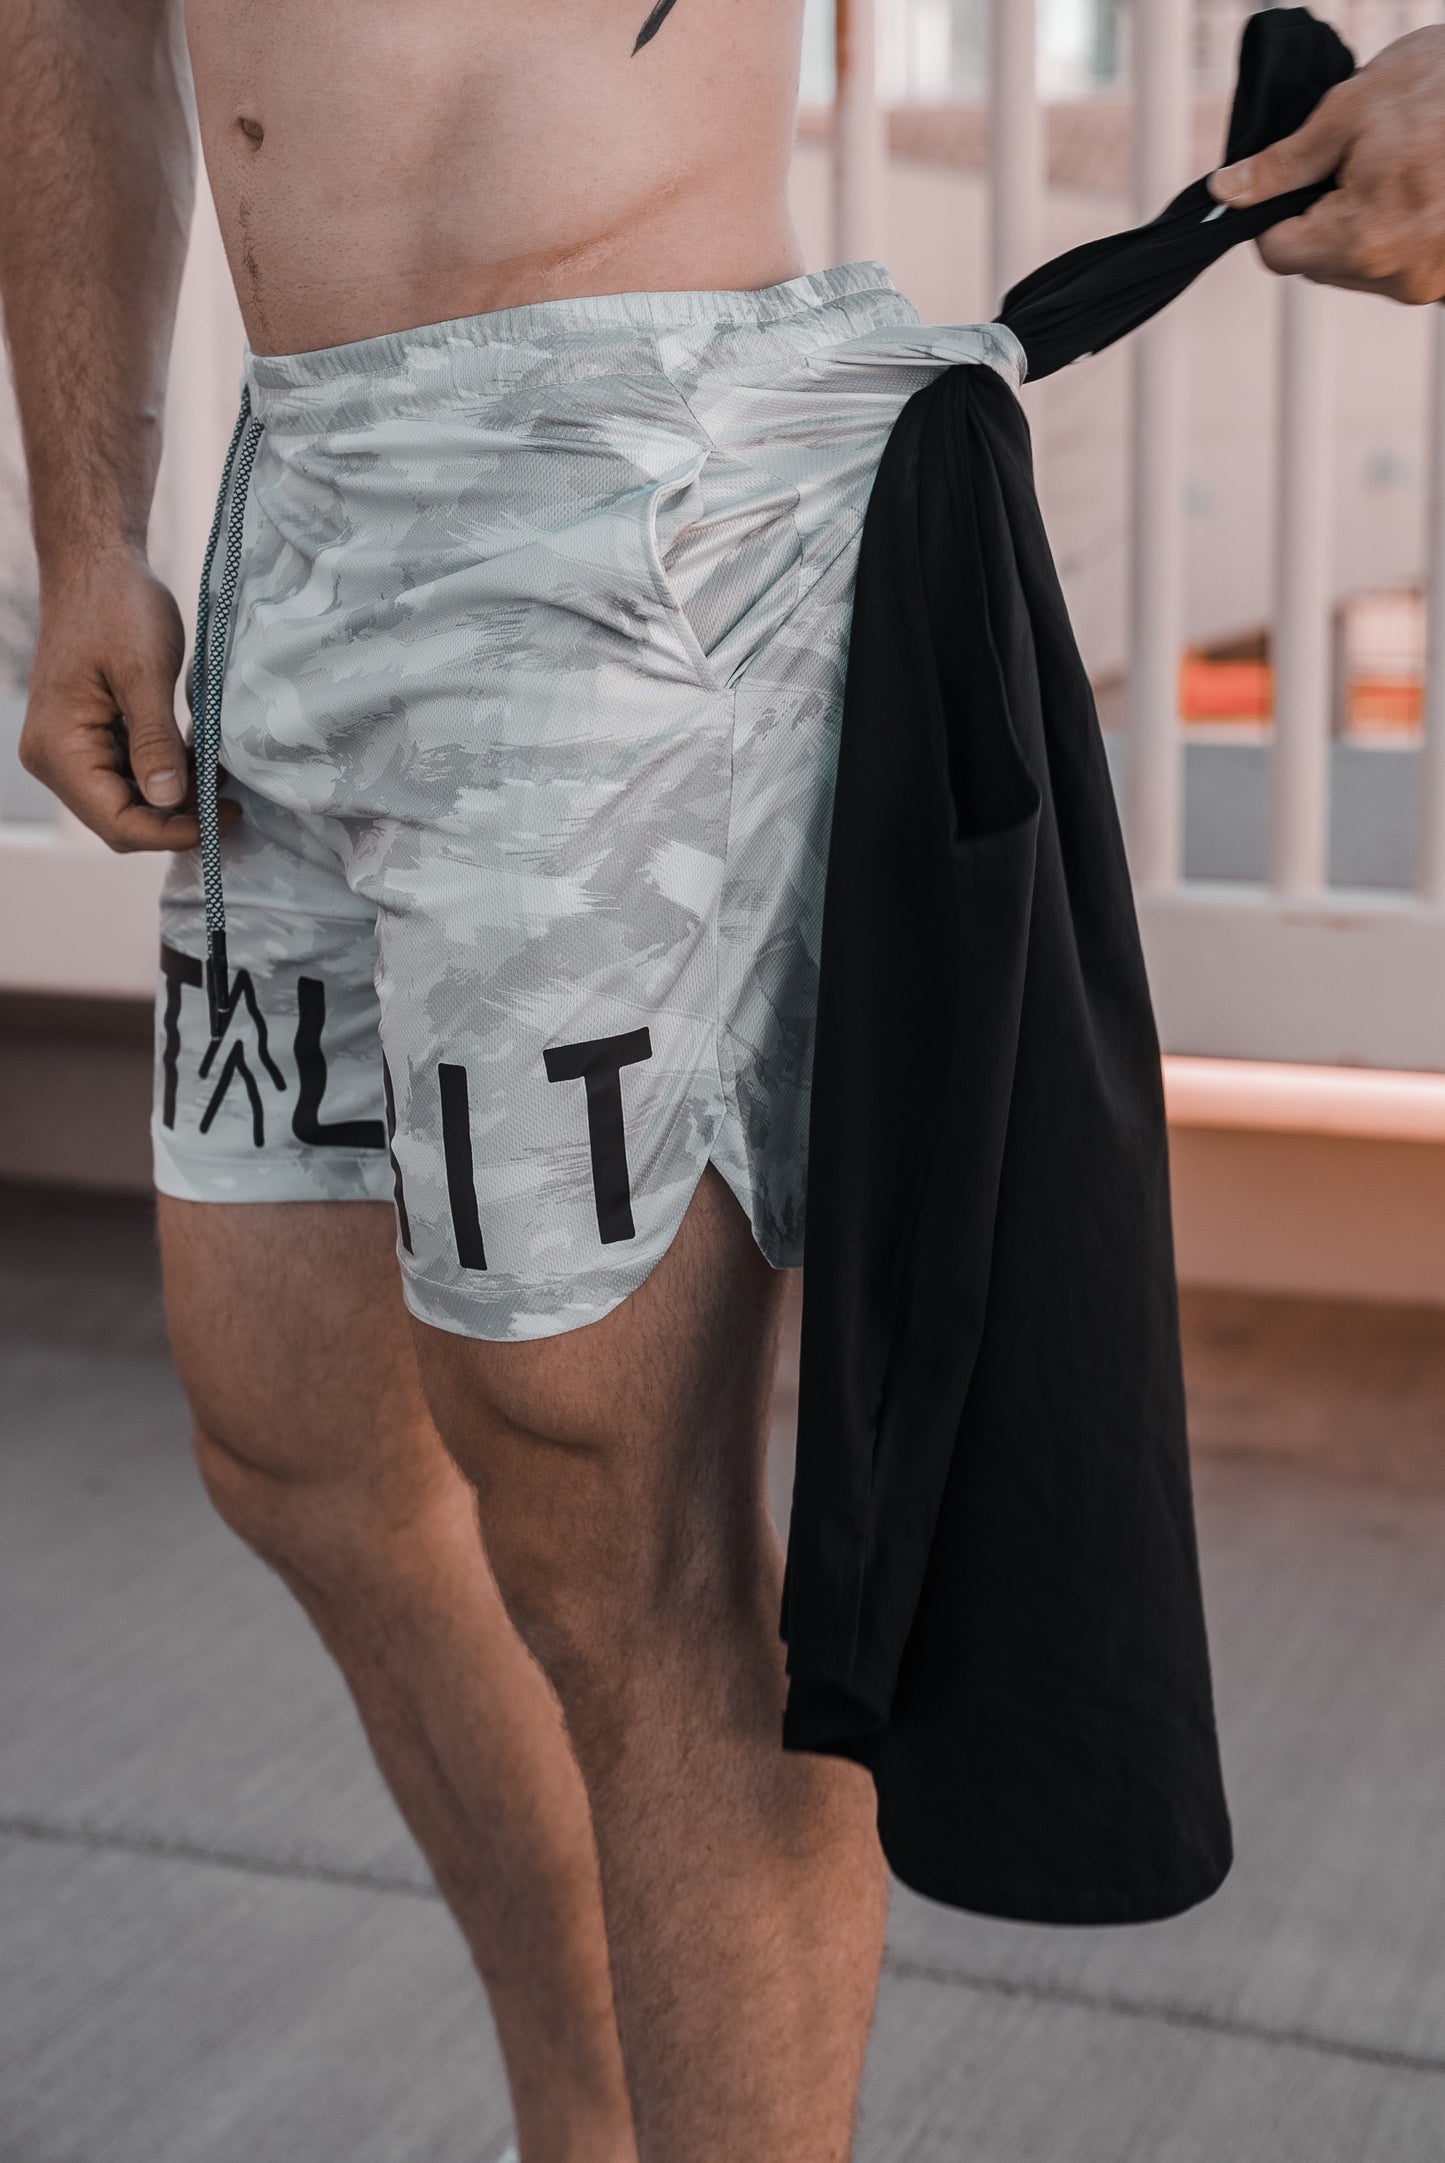 Detail shot of the white camo shorts showing the t-shirt loop in the back.